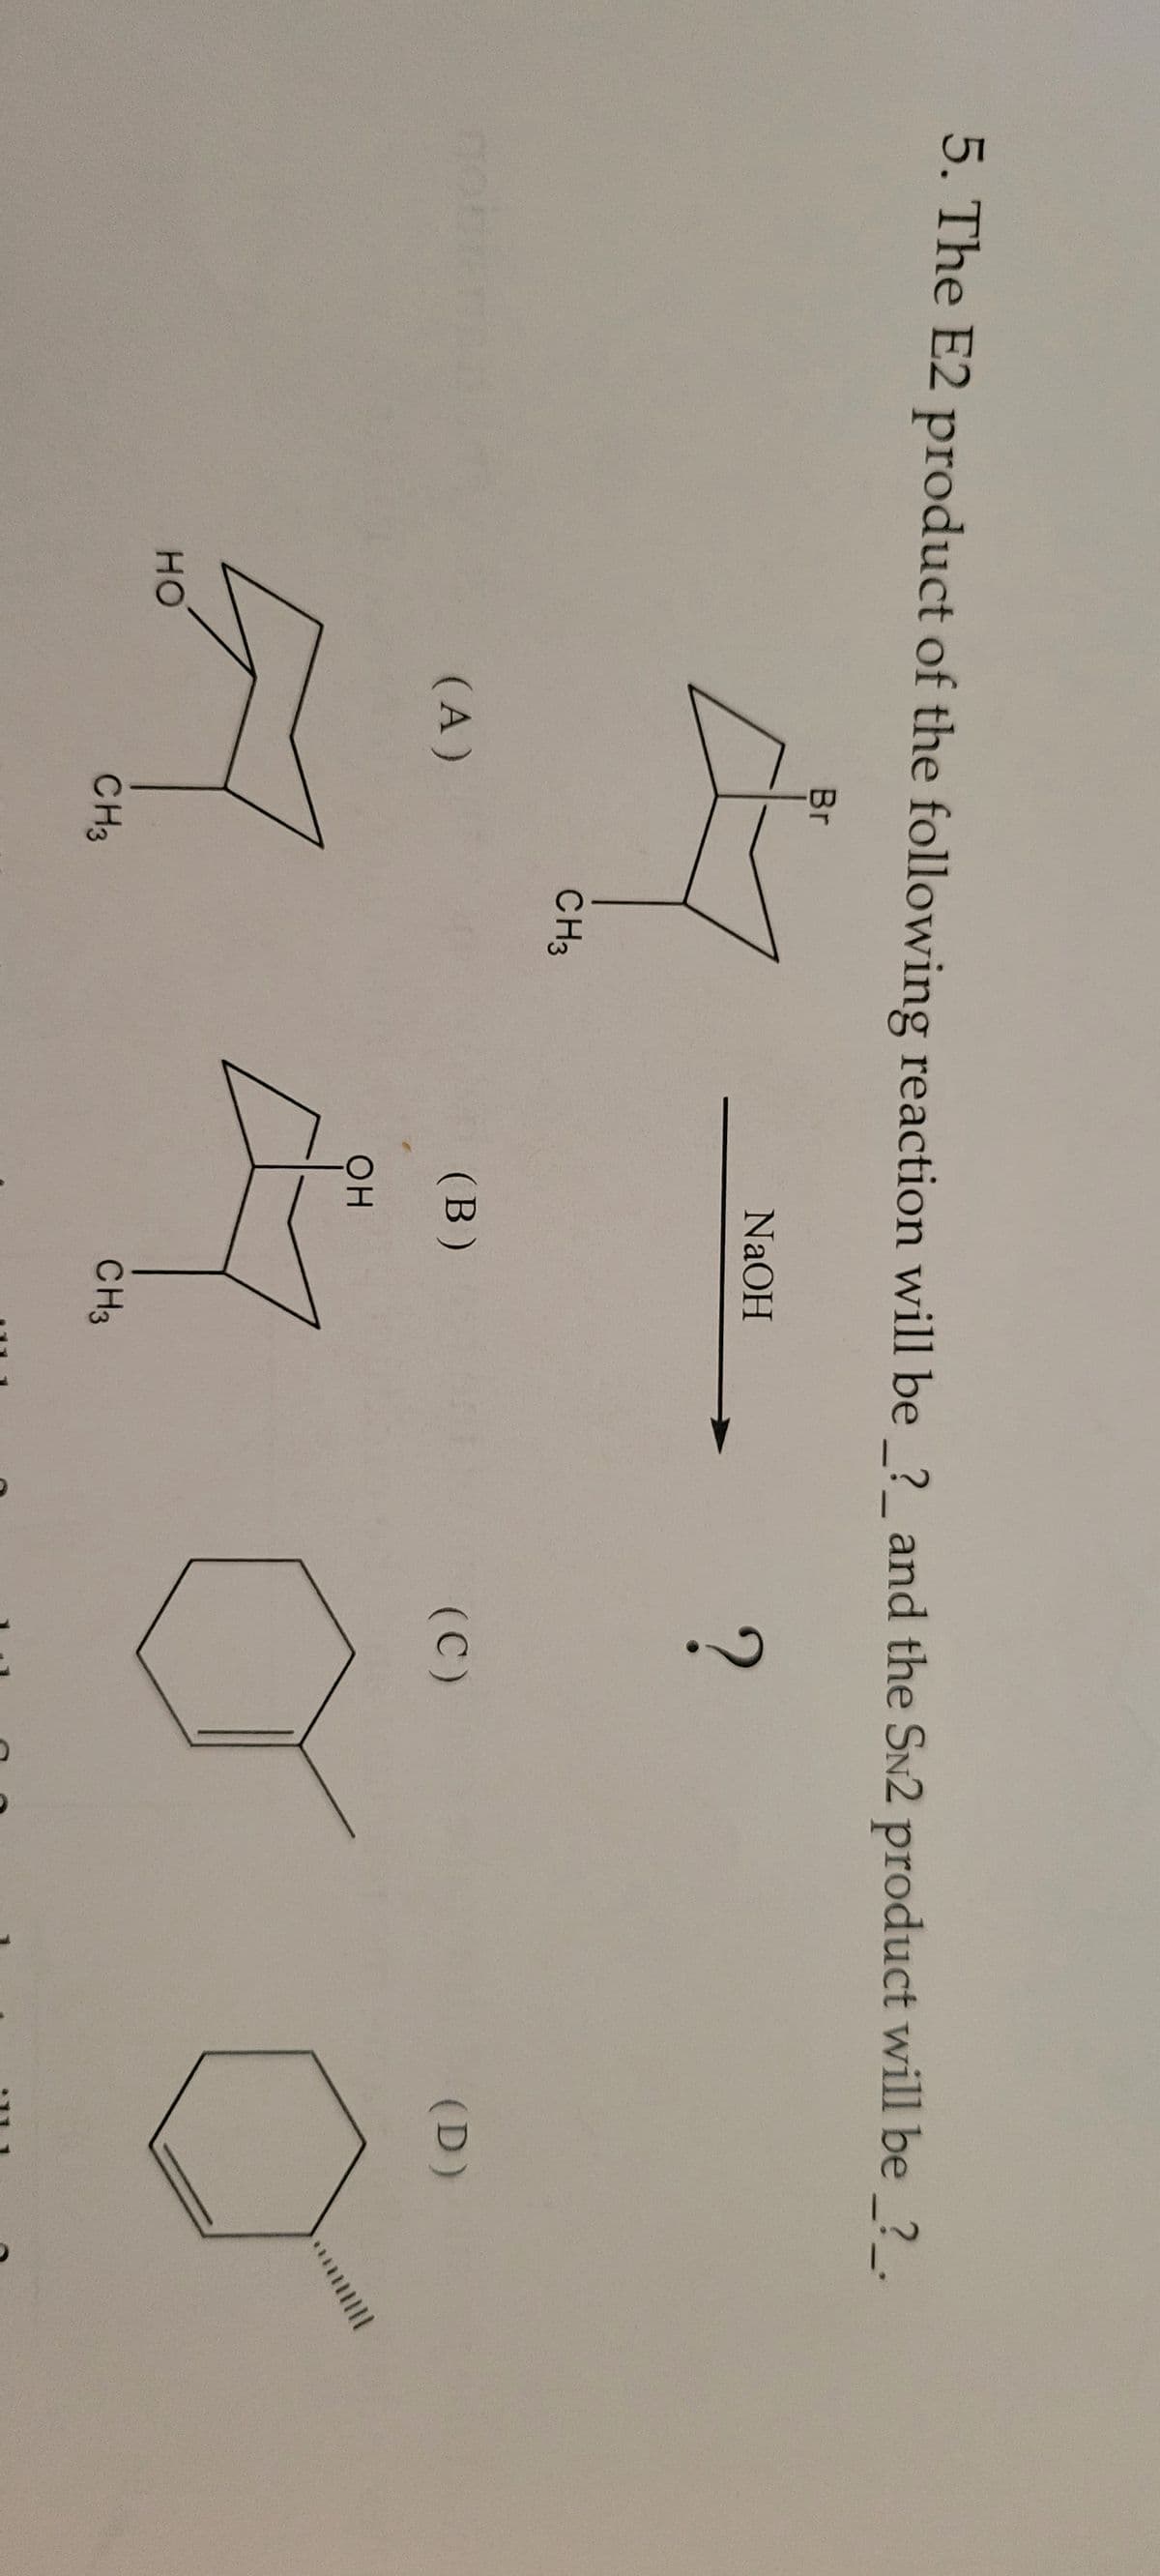 5. The E2 product of the following reaction will be _?__ and the SN2 product will be _?__.
Br
47
?
CH3
noniensis
HO
(A)
CH3
NaOH
(B)
он
CH3
(C)
(D)
|||||